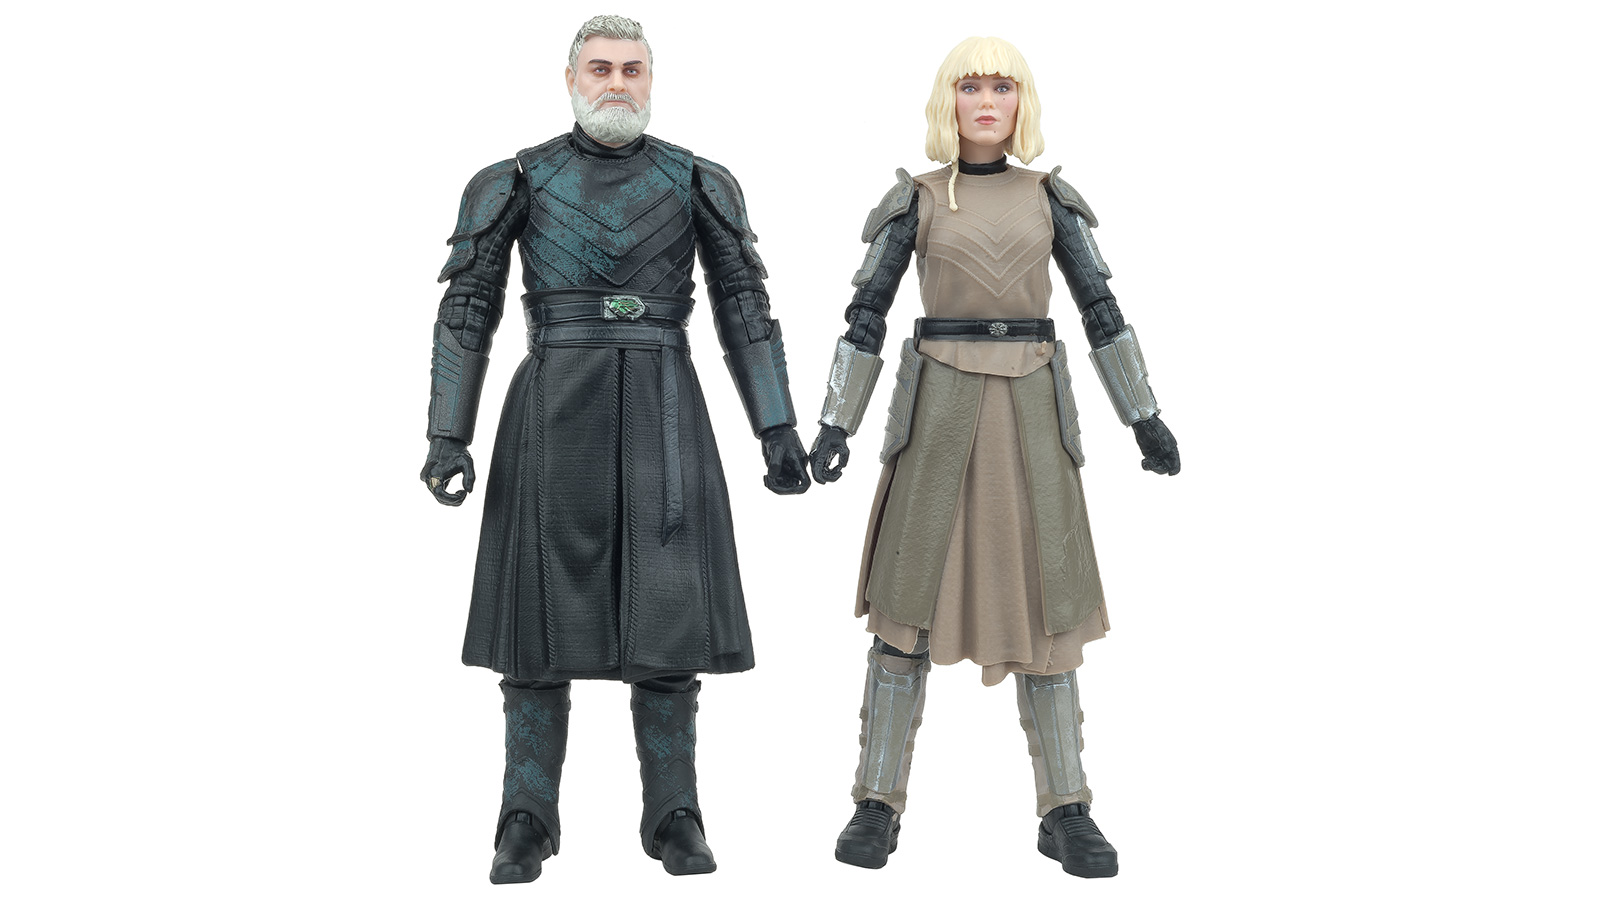 How Off In Scale Are The Black Series 6-Inch Baylan Skoll And Shin Hati Figures?